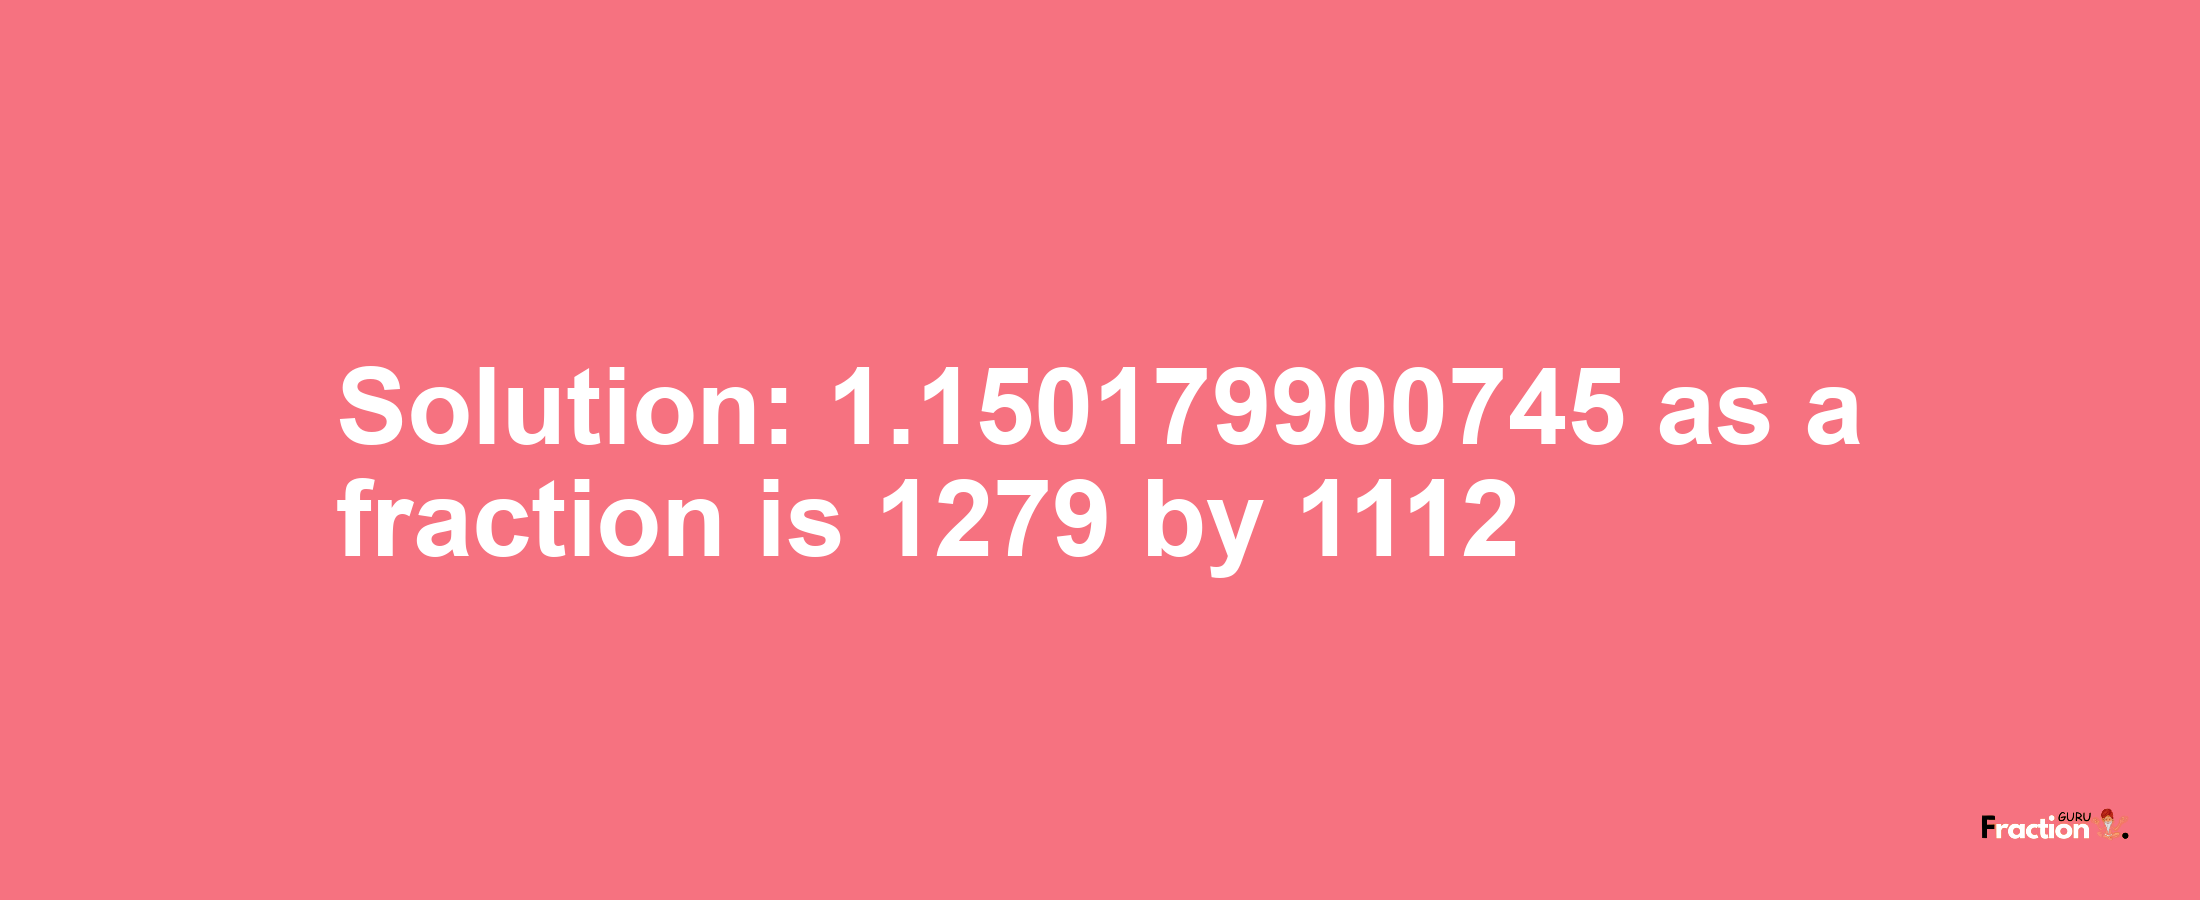 Solution:1.150179900745 as a fraction is 1279/1112